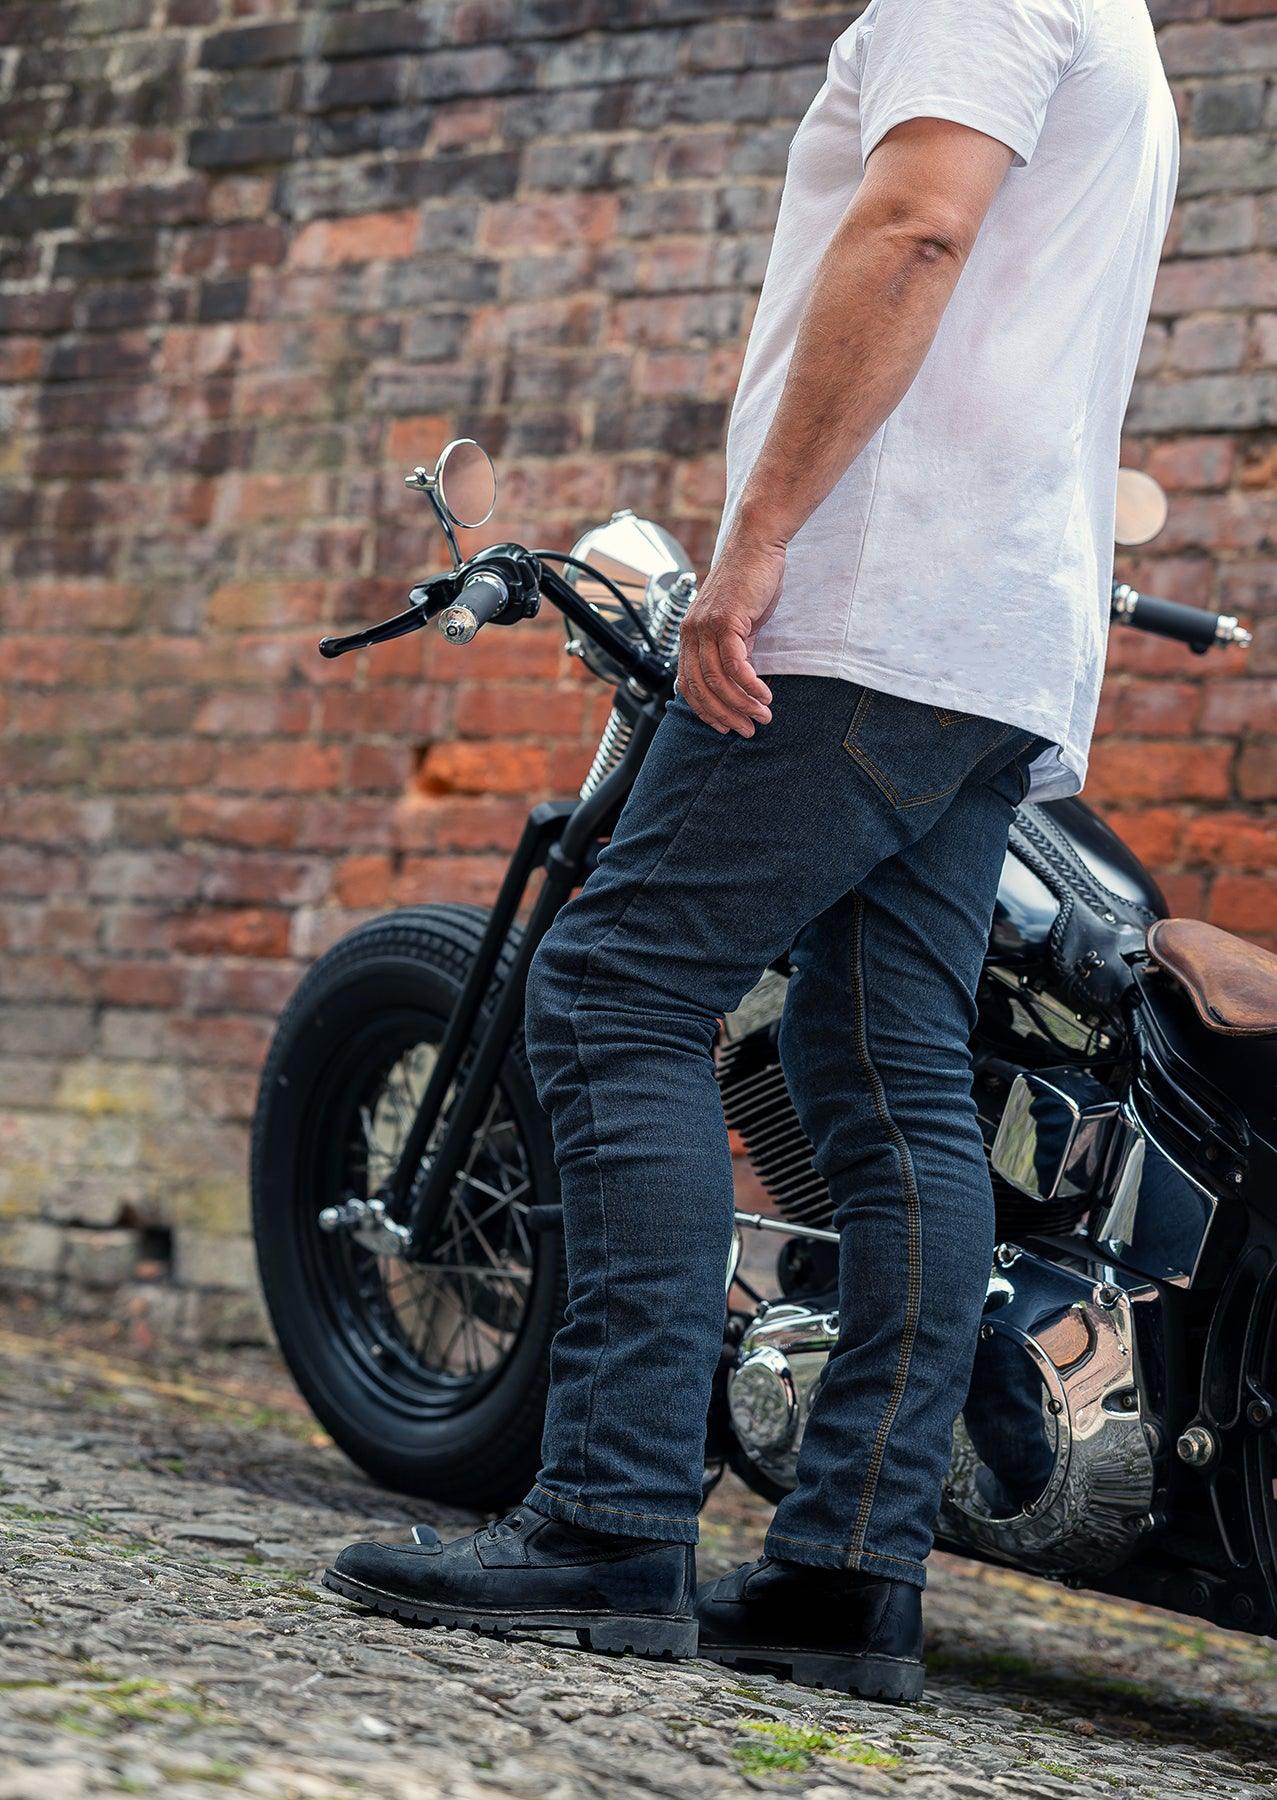 Taranis AAA-rated single layer motorcycle jeans for men in black